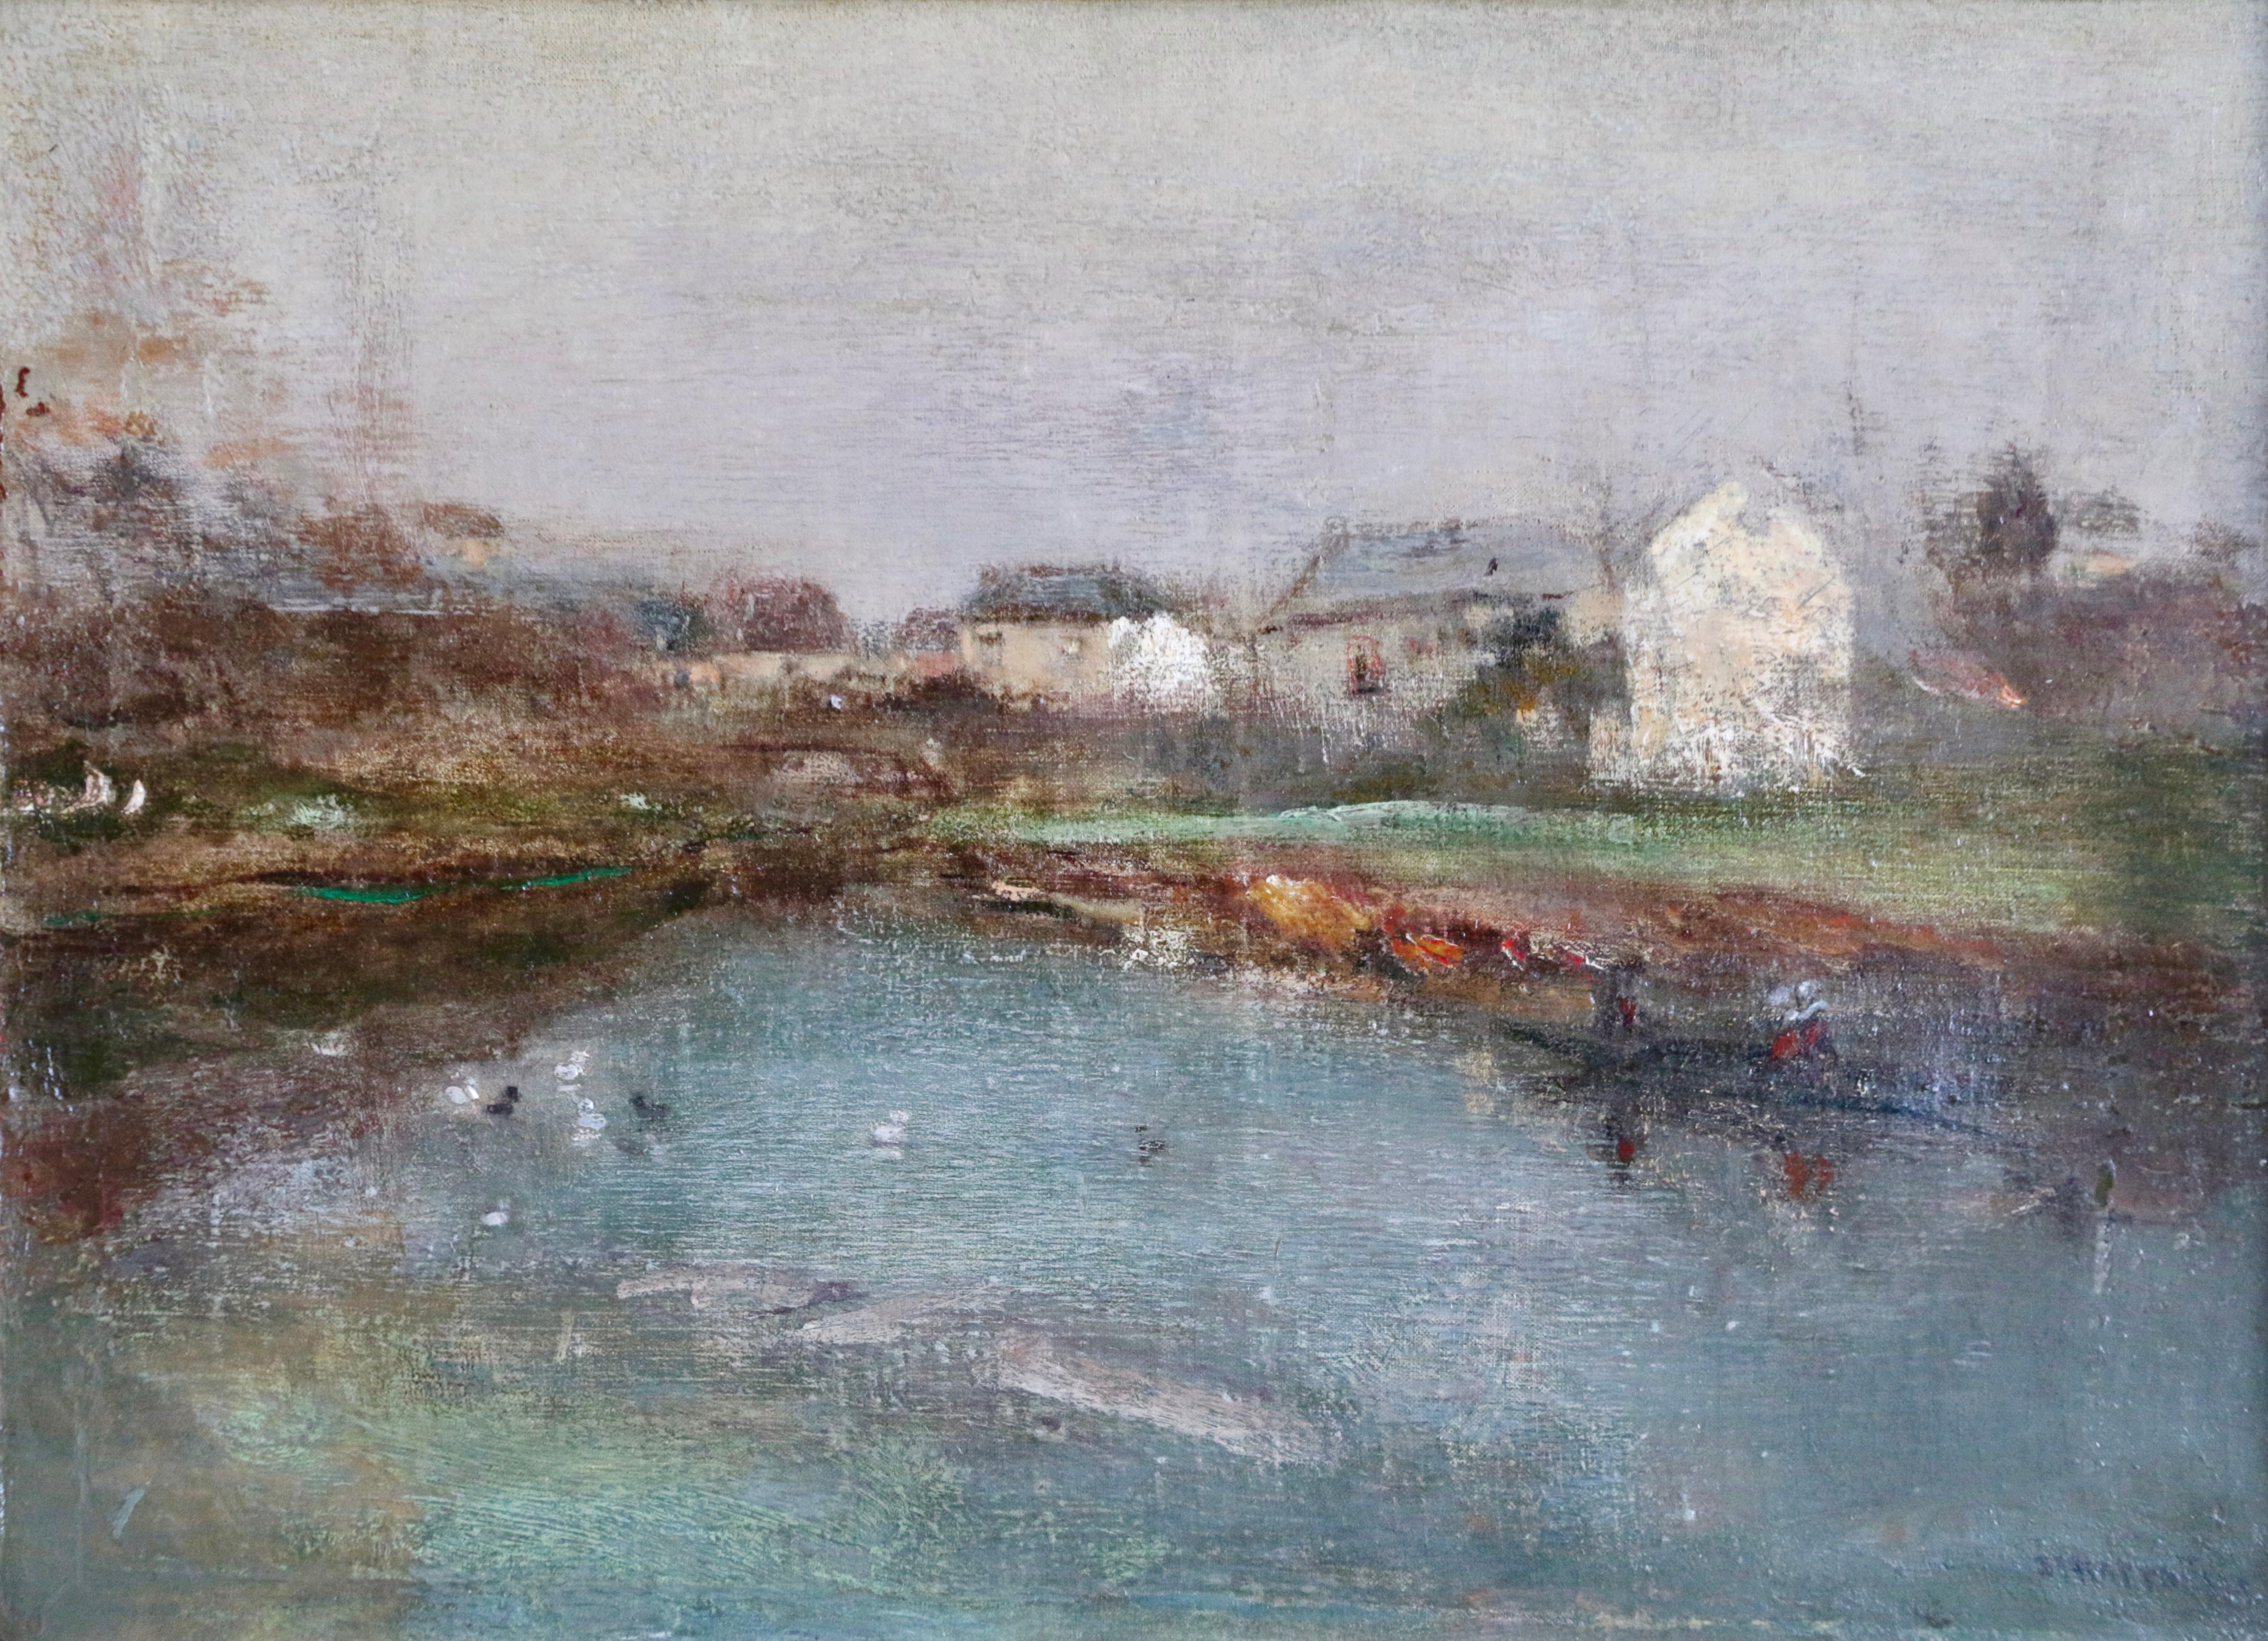 On the River - 19th Century Oil, Cottages by Boats on a River by Raffaelli - Painting by Jean-Francois Raffaelli